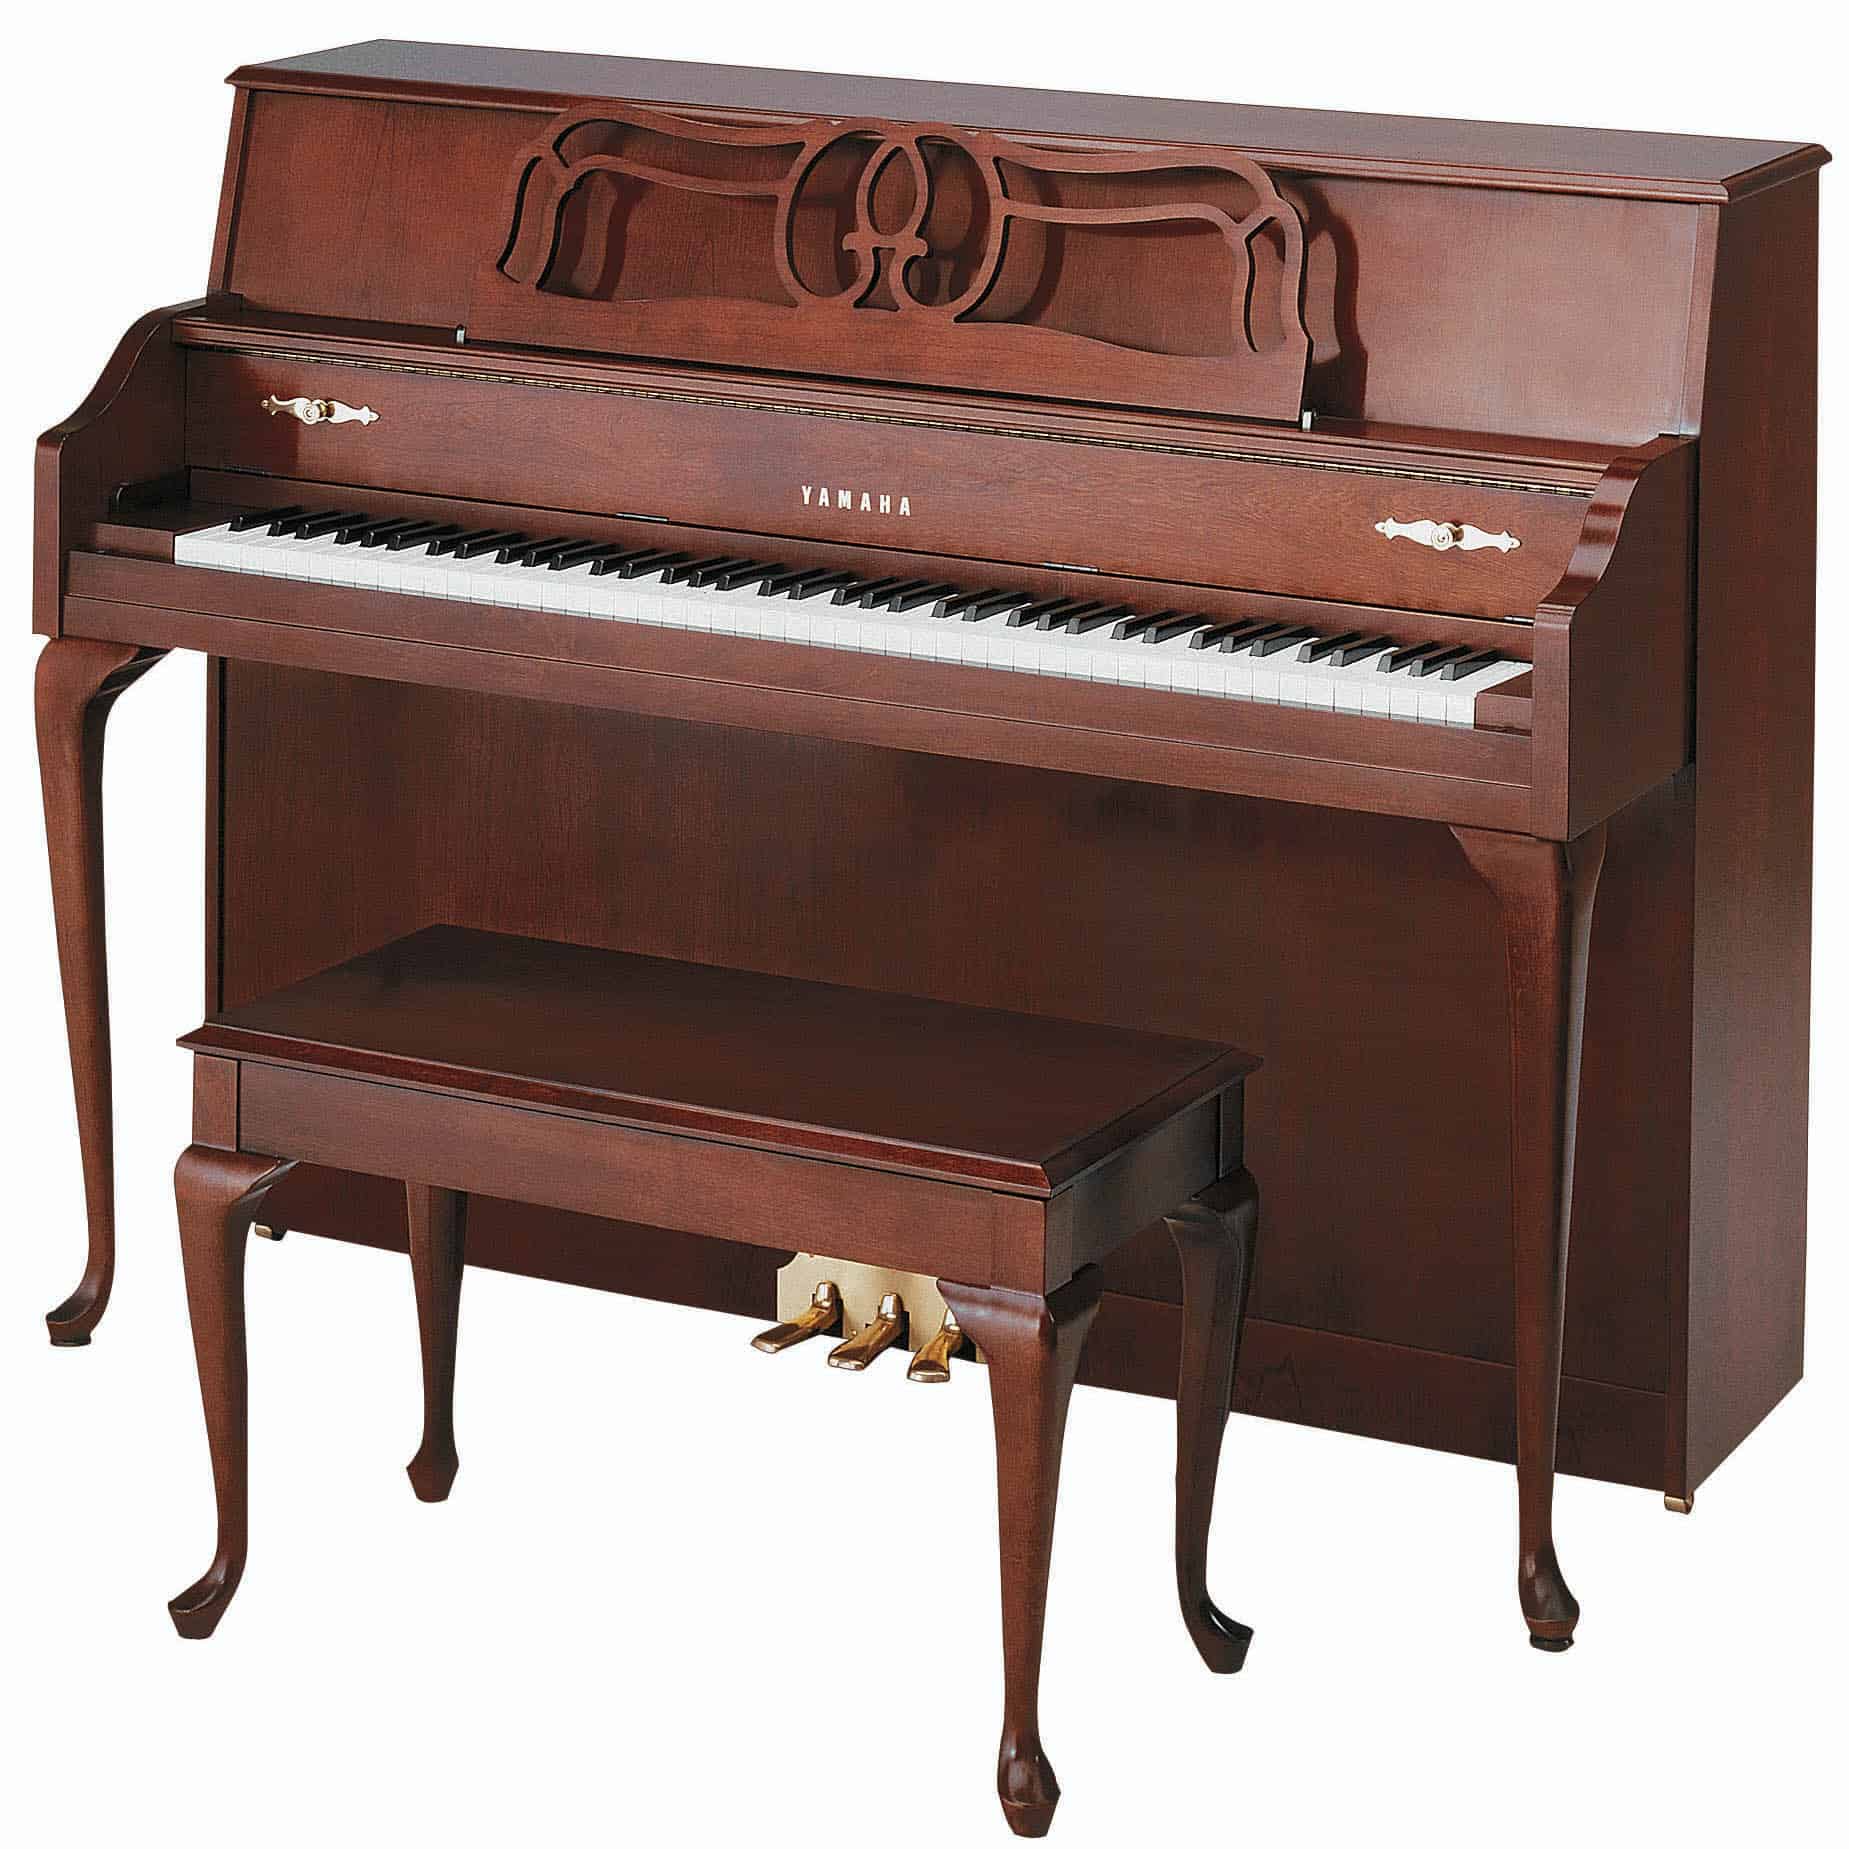 M500 Yamaha Upright Piano Queen Anne Style in Cherry Wood